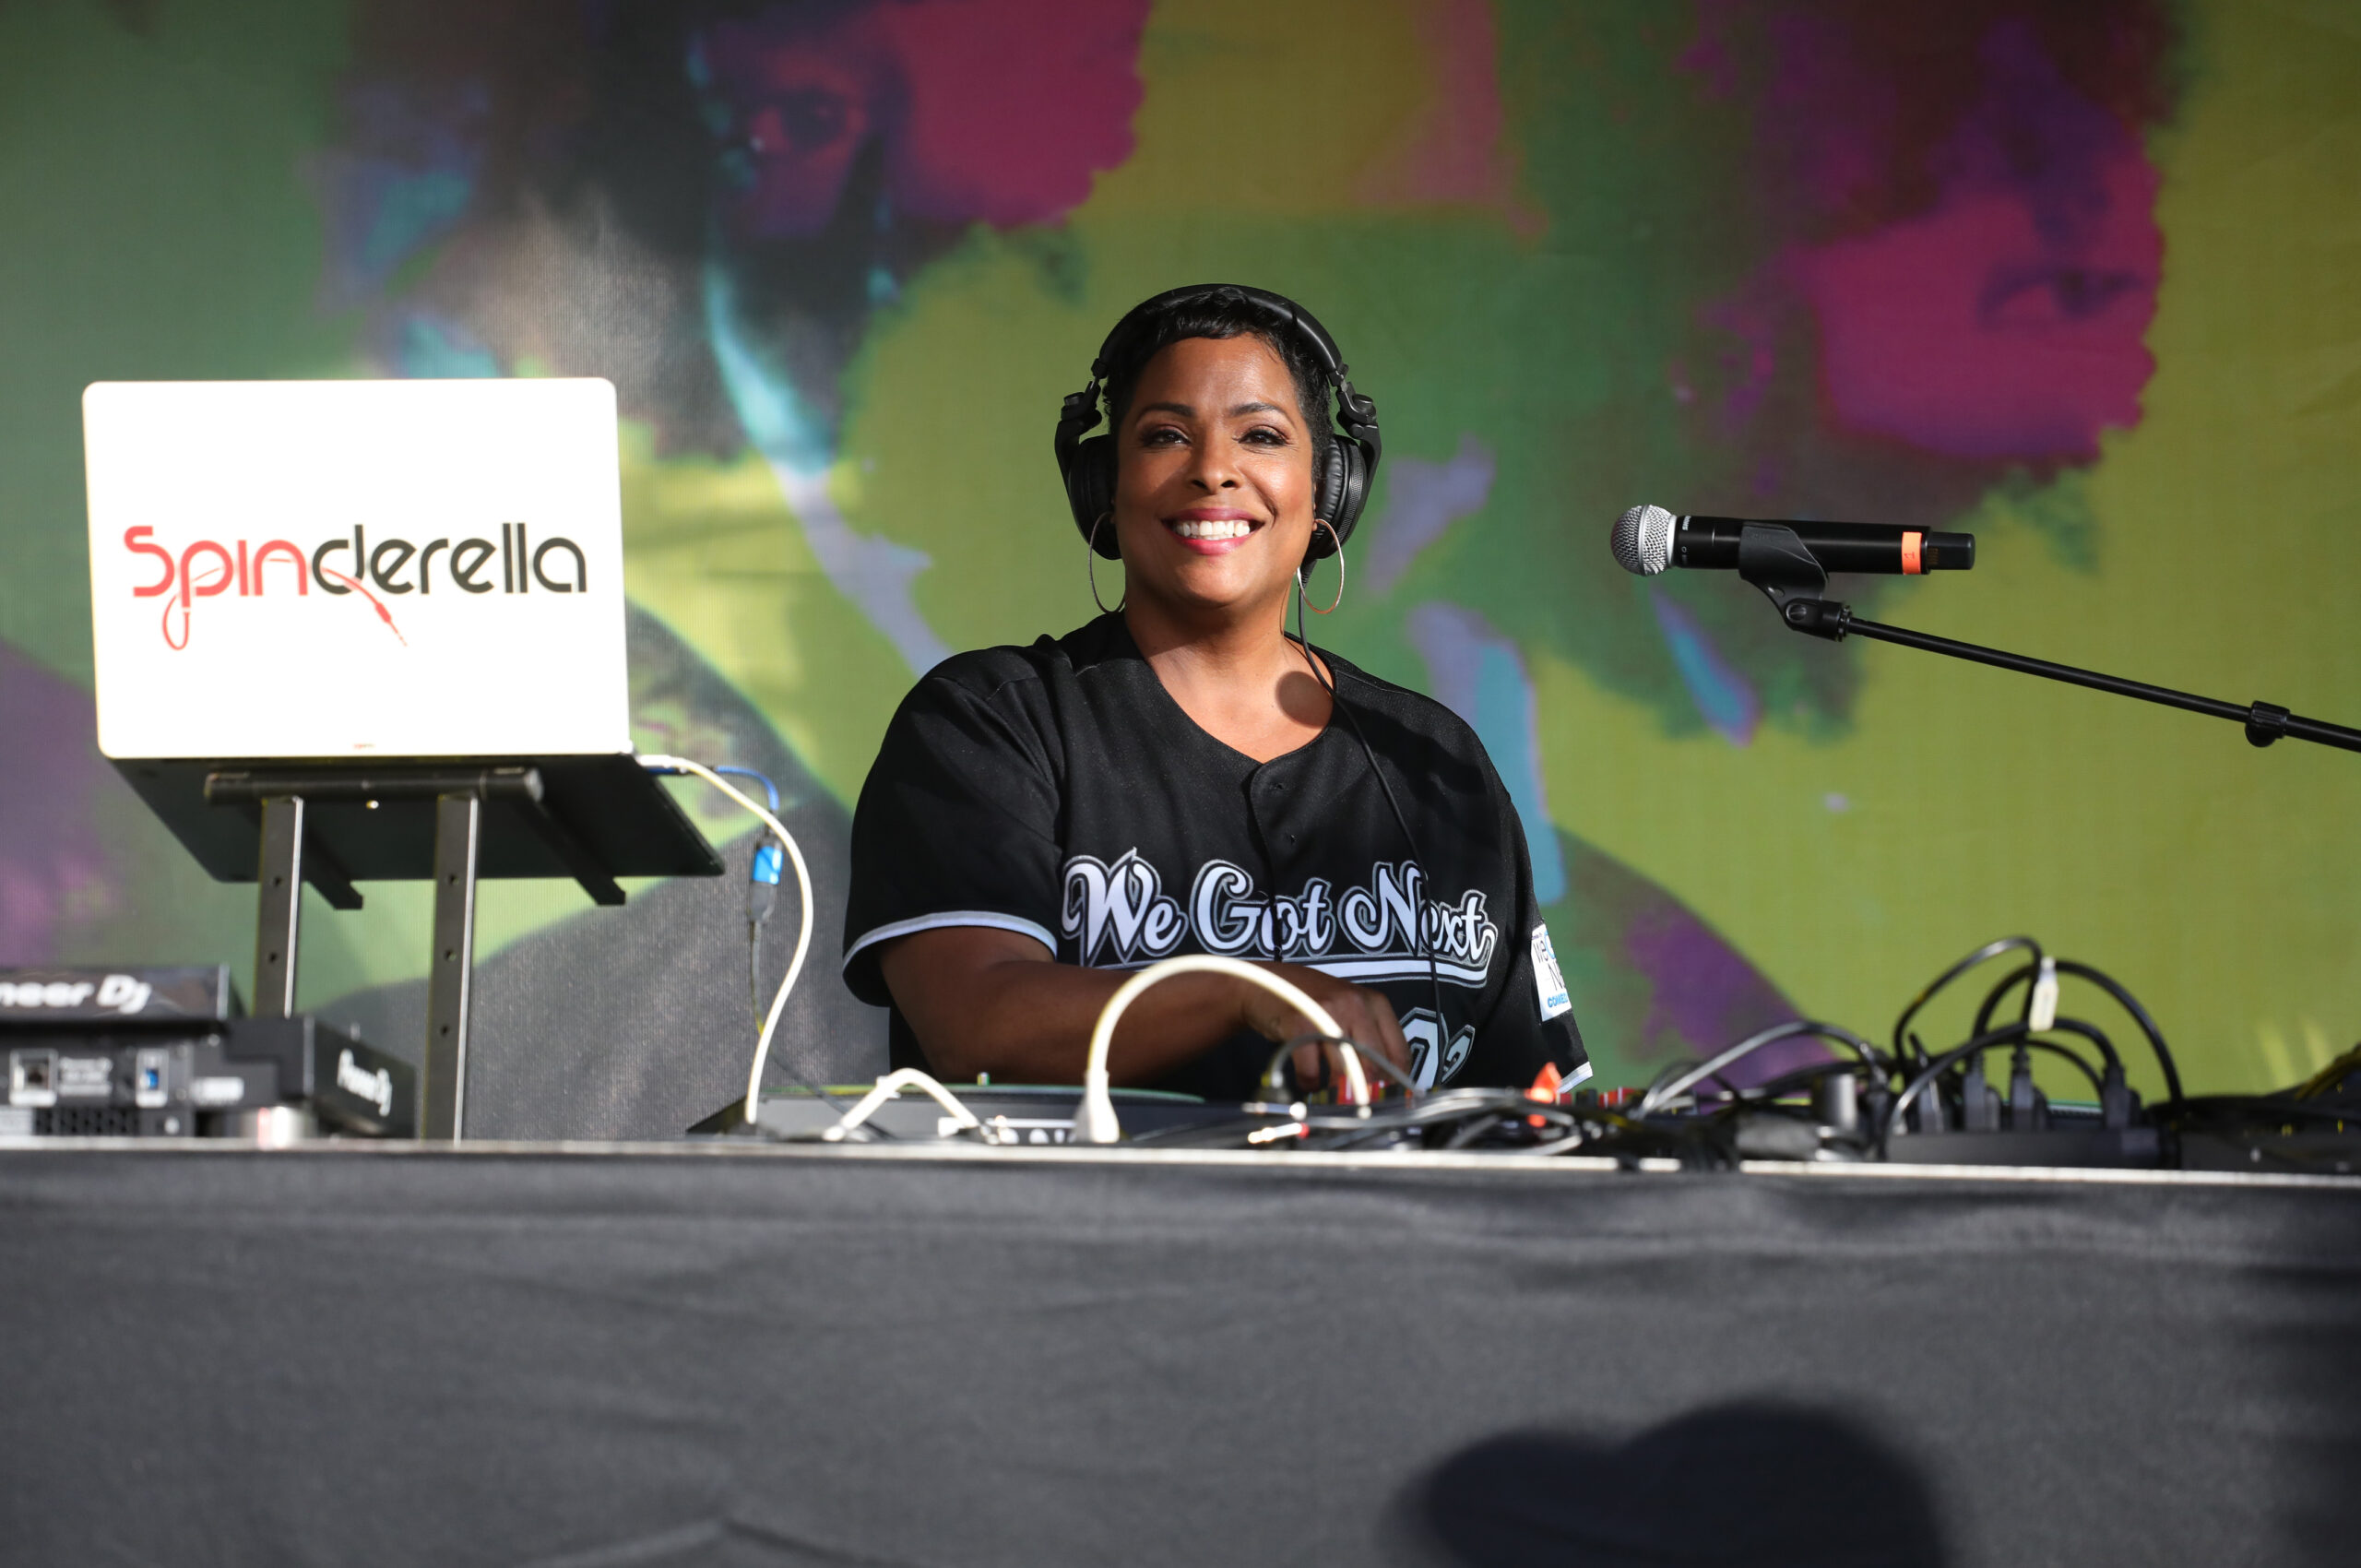 Spinderella is still very much in demand as a DJ in the US, commanding huge fees